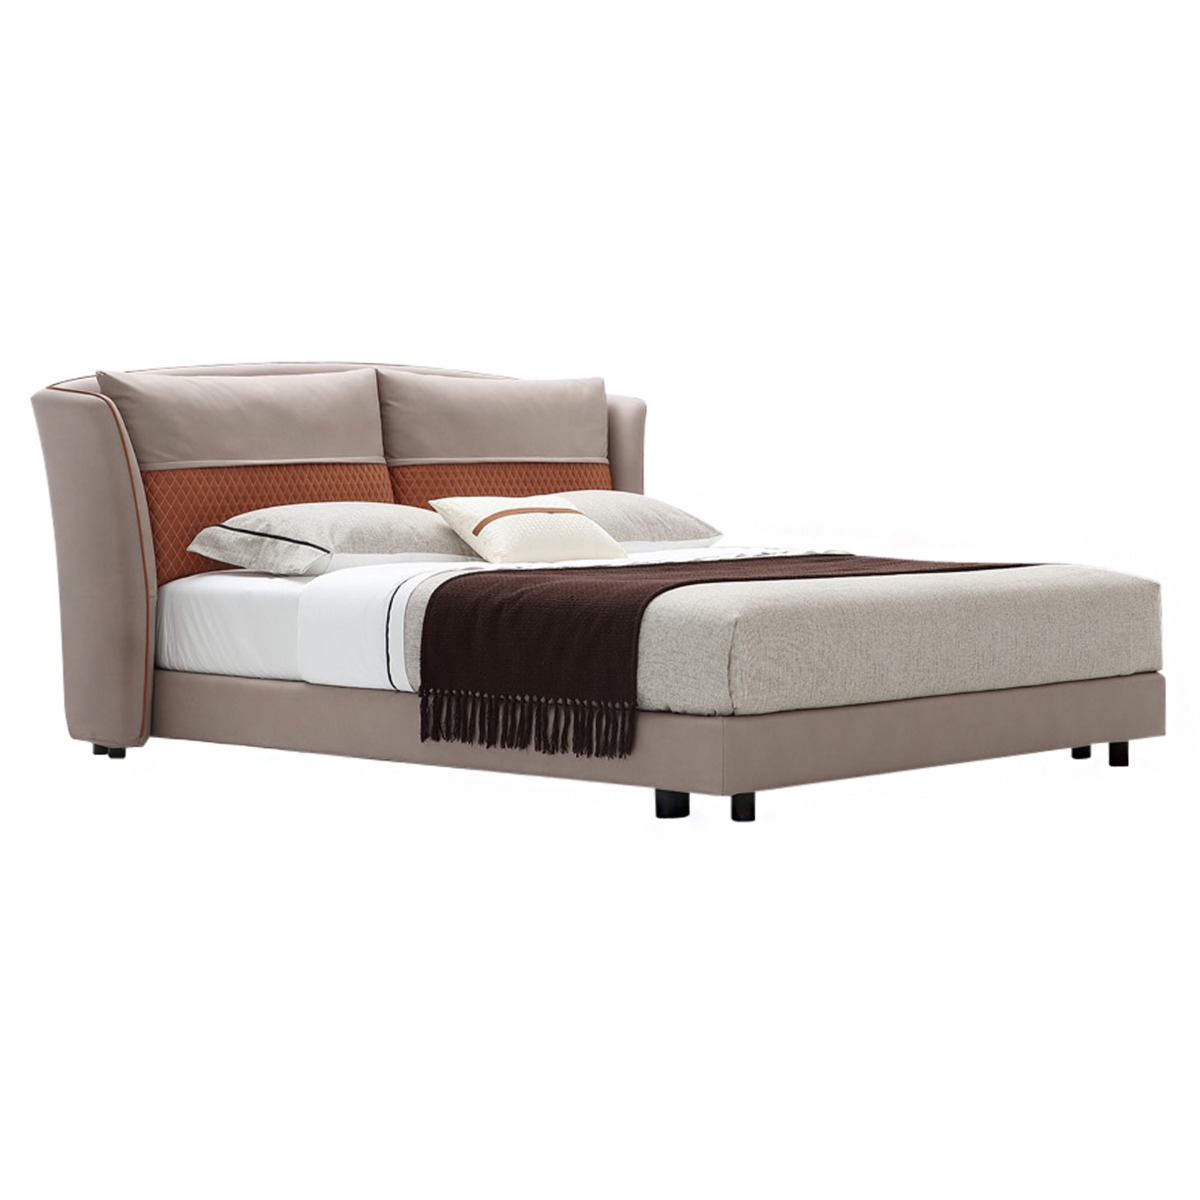 Chicago Luxury King Size Bed 